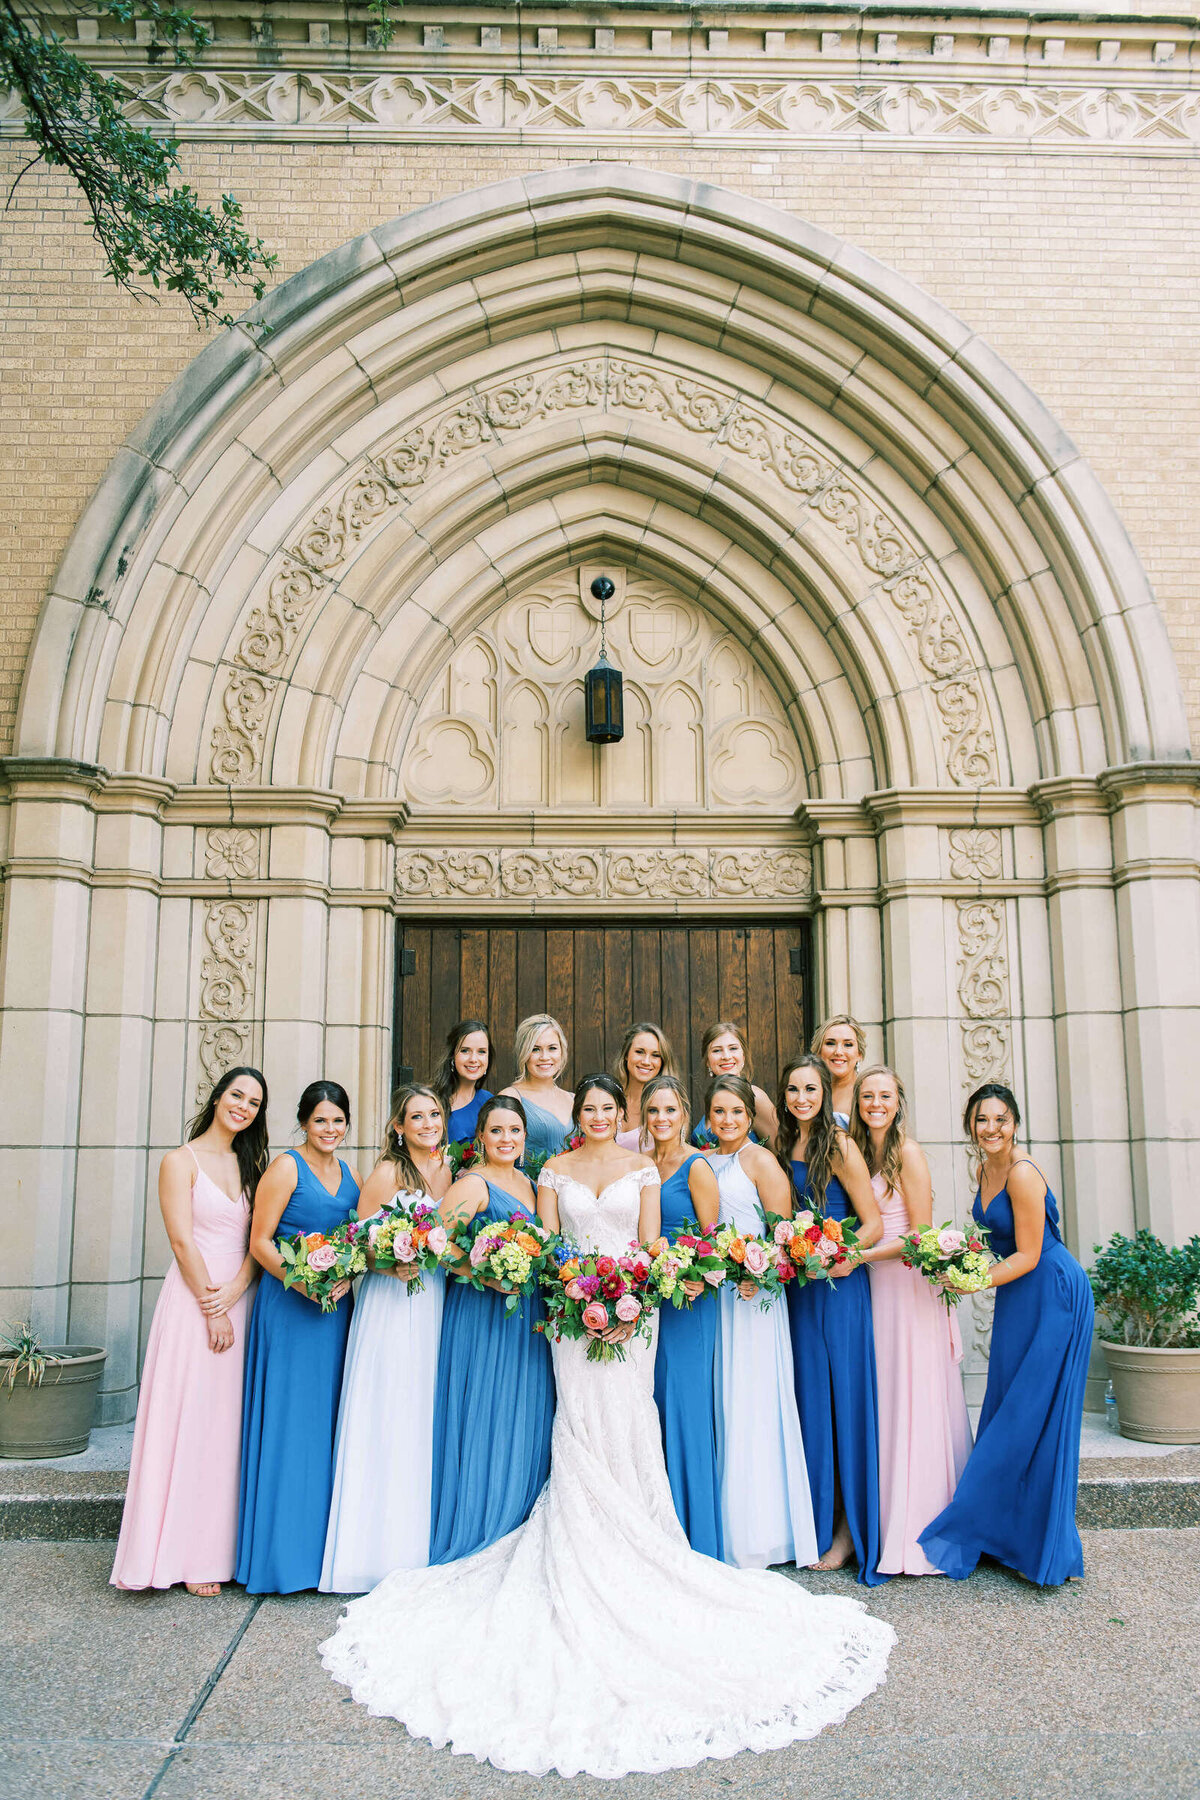 Bridal party and bride pose in front of ornate cathedral building in Fort Worth